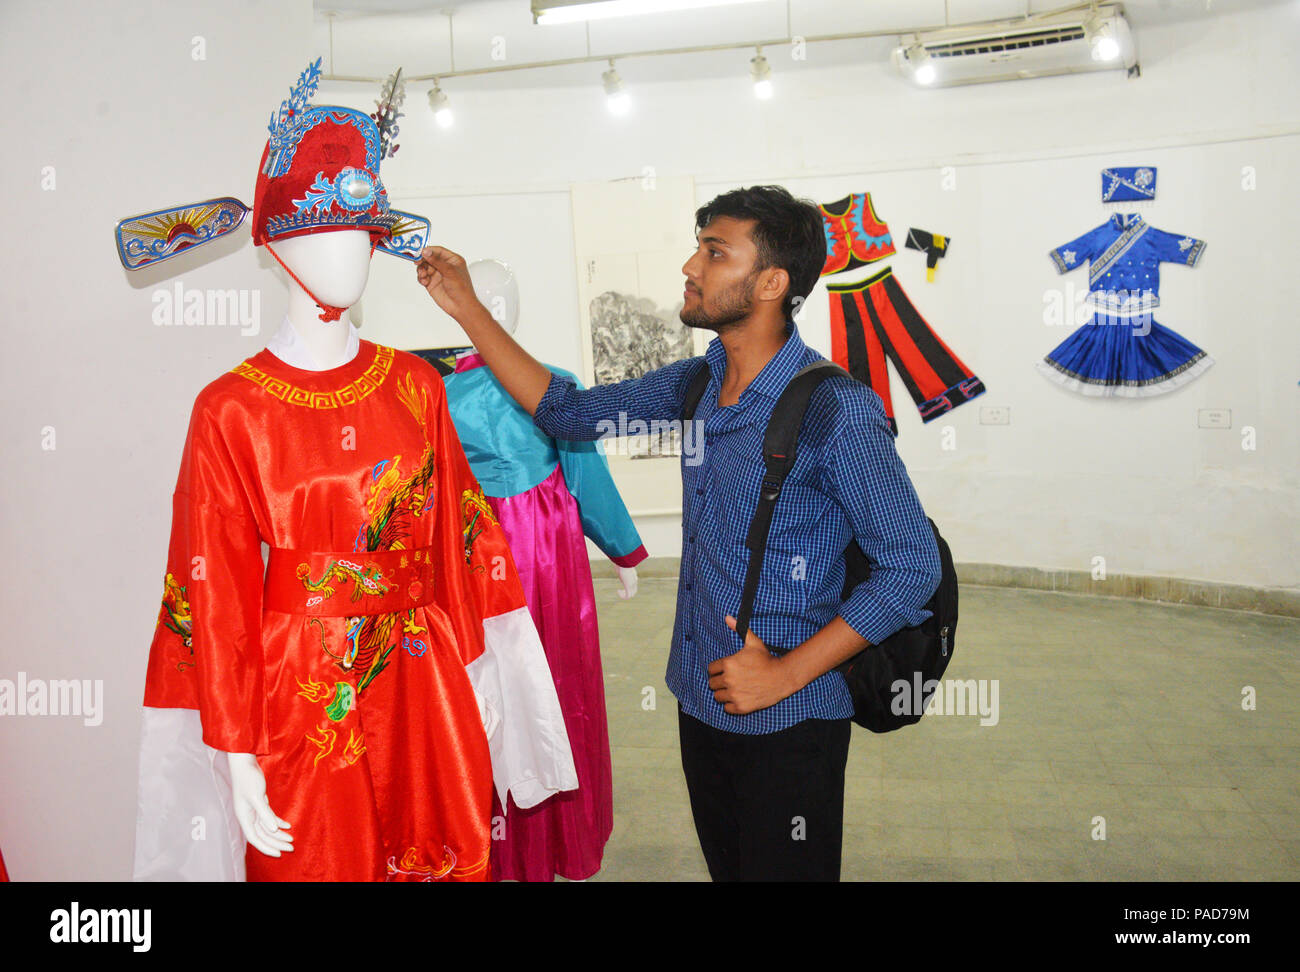 Dhaka. 22nd July, 2018. A visitor touches a hat at the exhibition portraying the history and culture of the ancient Silk Road in Zainul Gallery of the Faculty of Fine Arts of Dhaka University (DU) in Dhaka, Bangladesh, on July 22, 2018. Credit: Xinhua/Alamy Live News Stock Photo